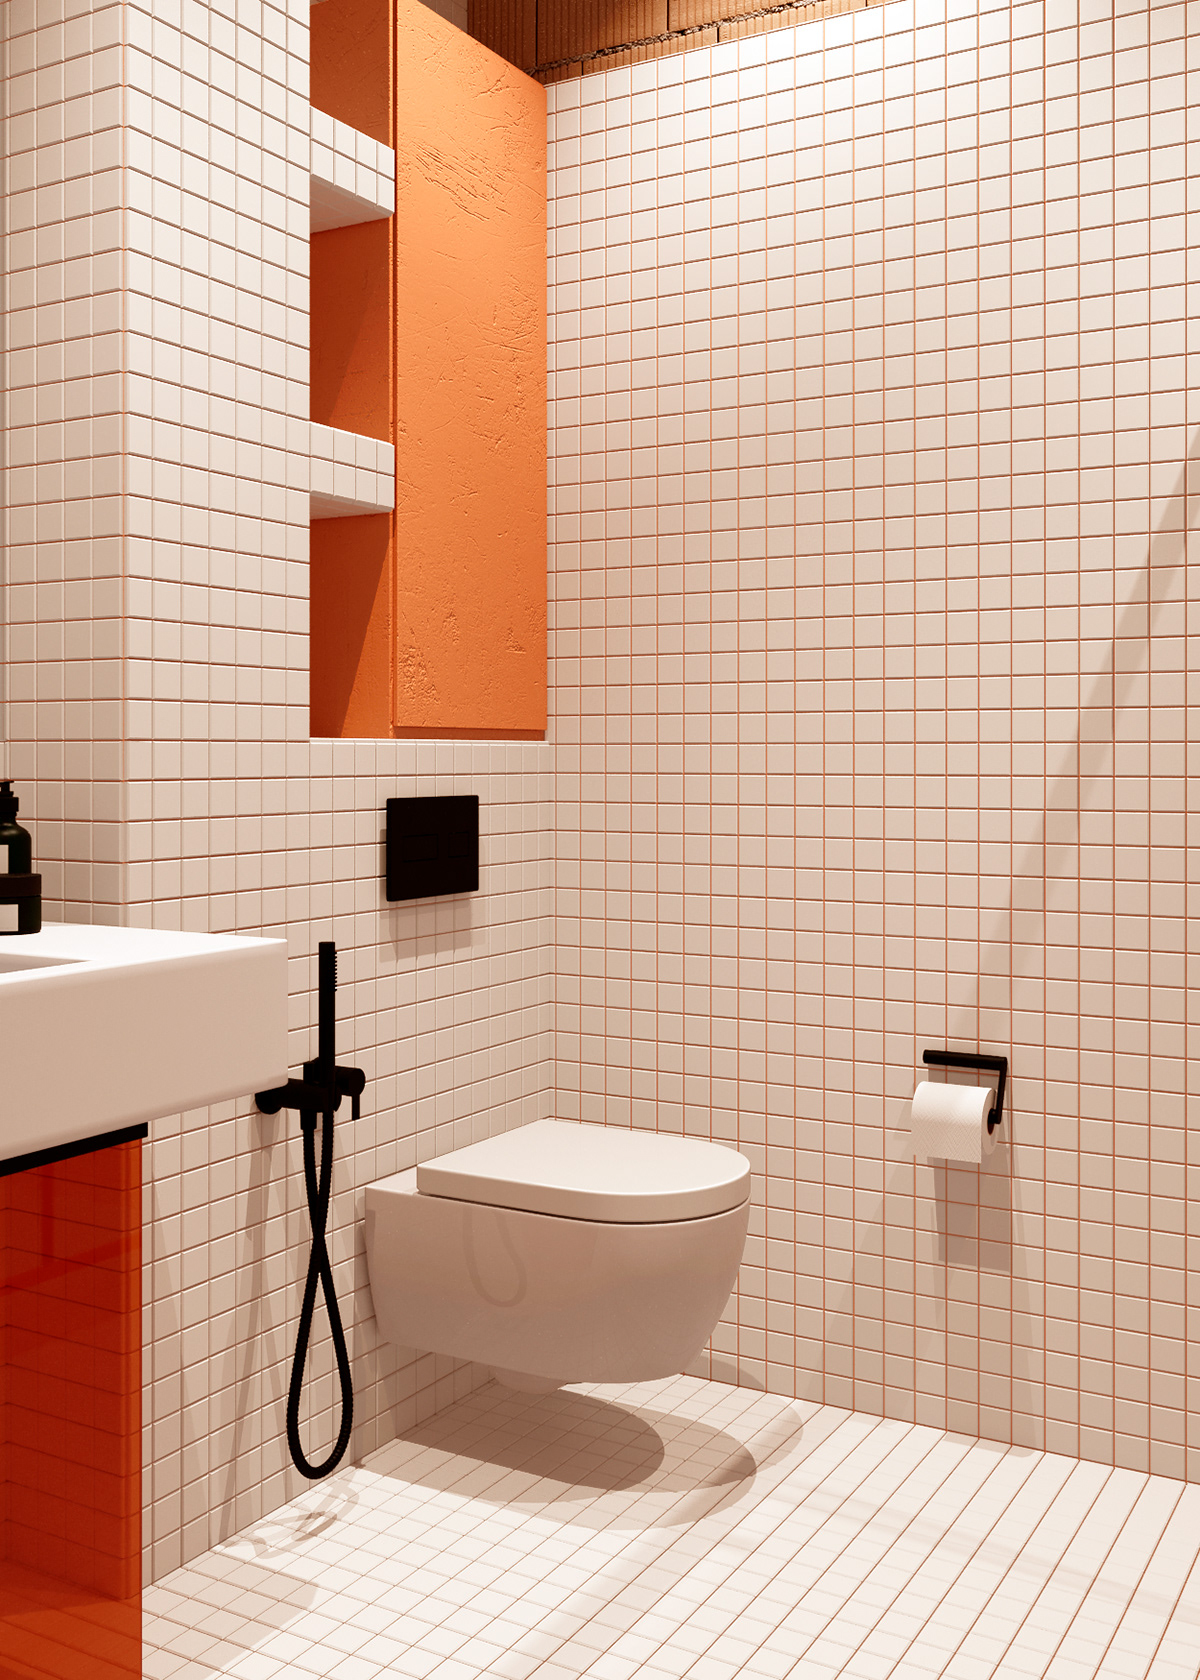 An orange cabinet is cleverly designed to blend in with the wall.